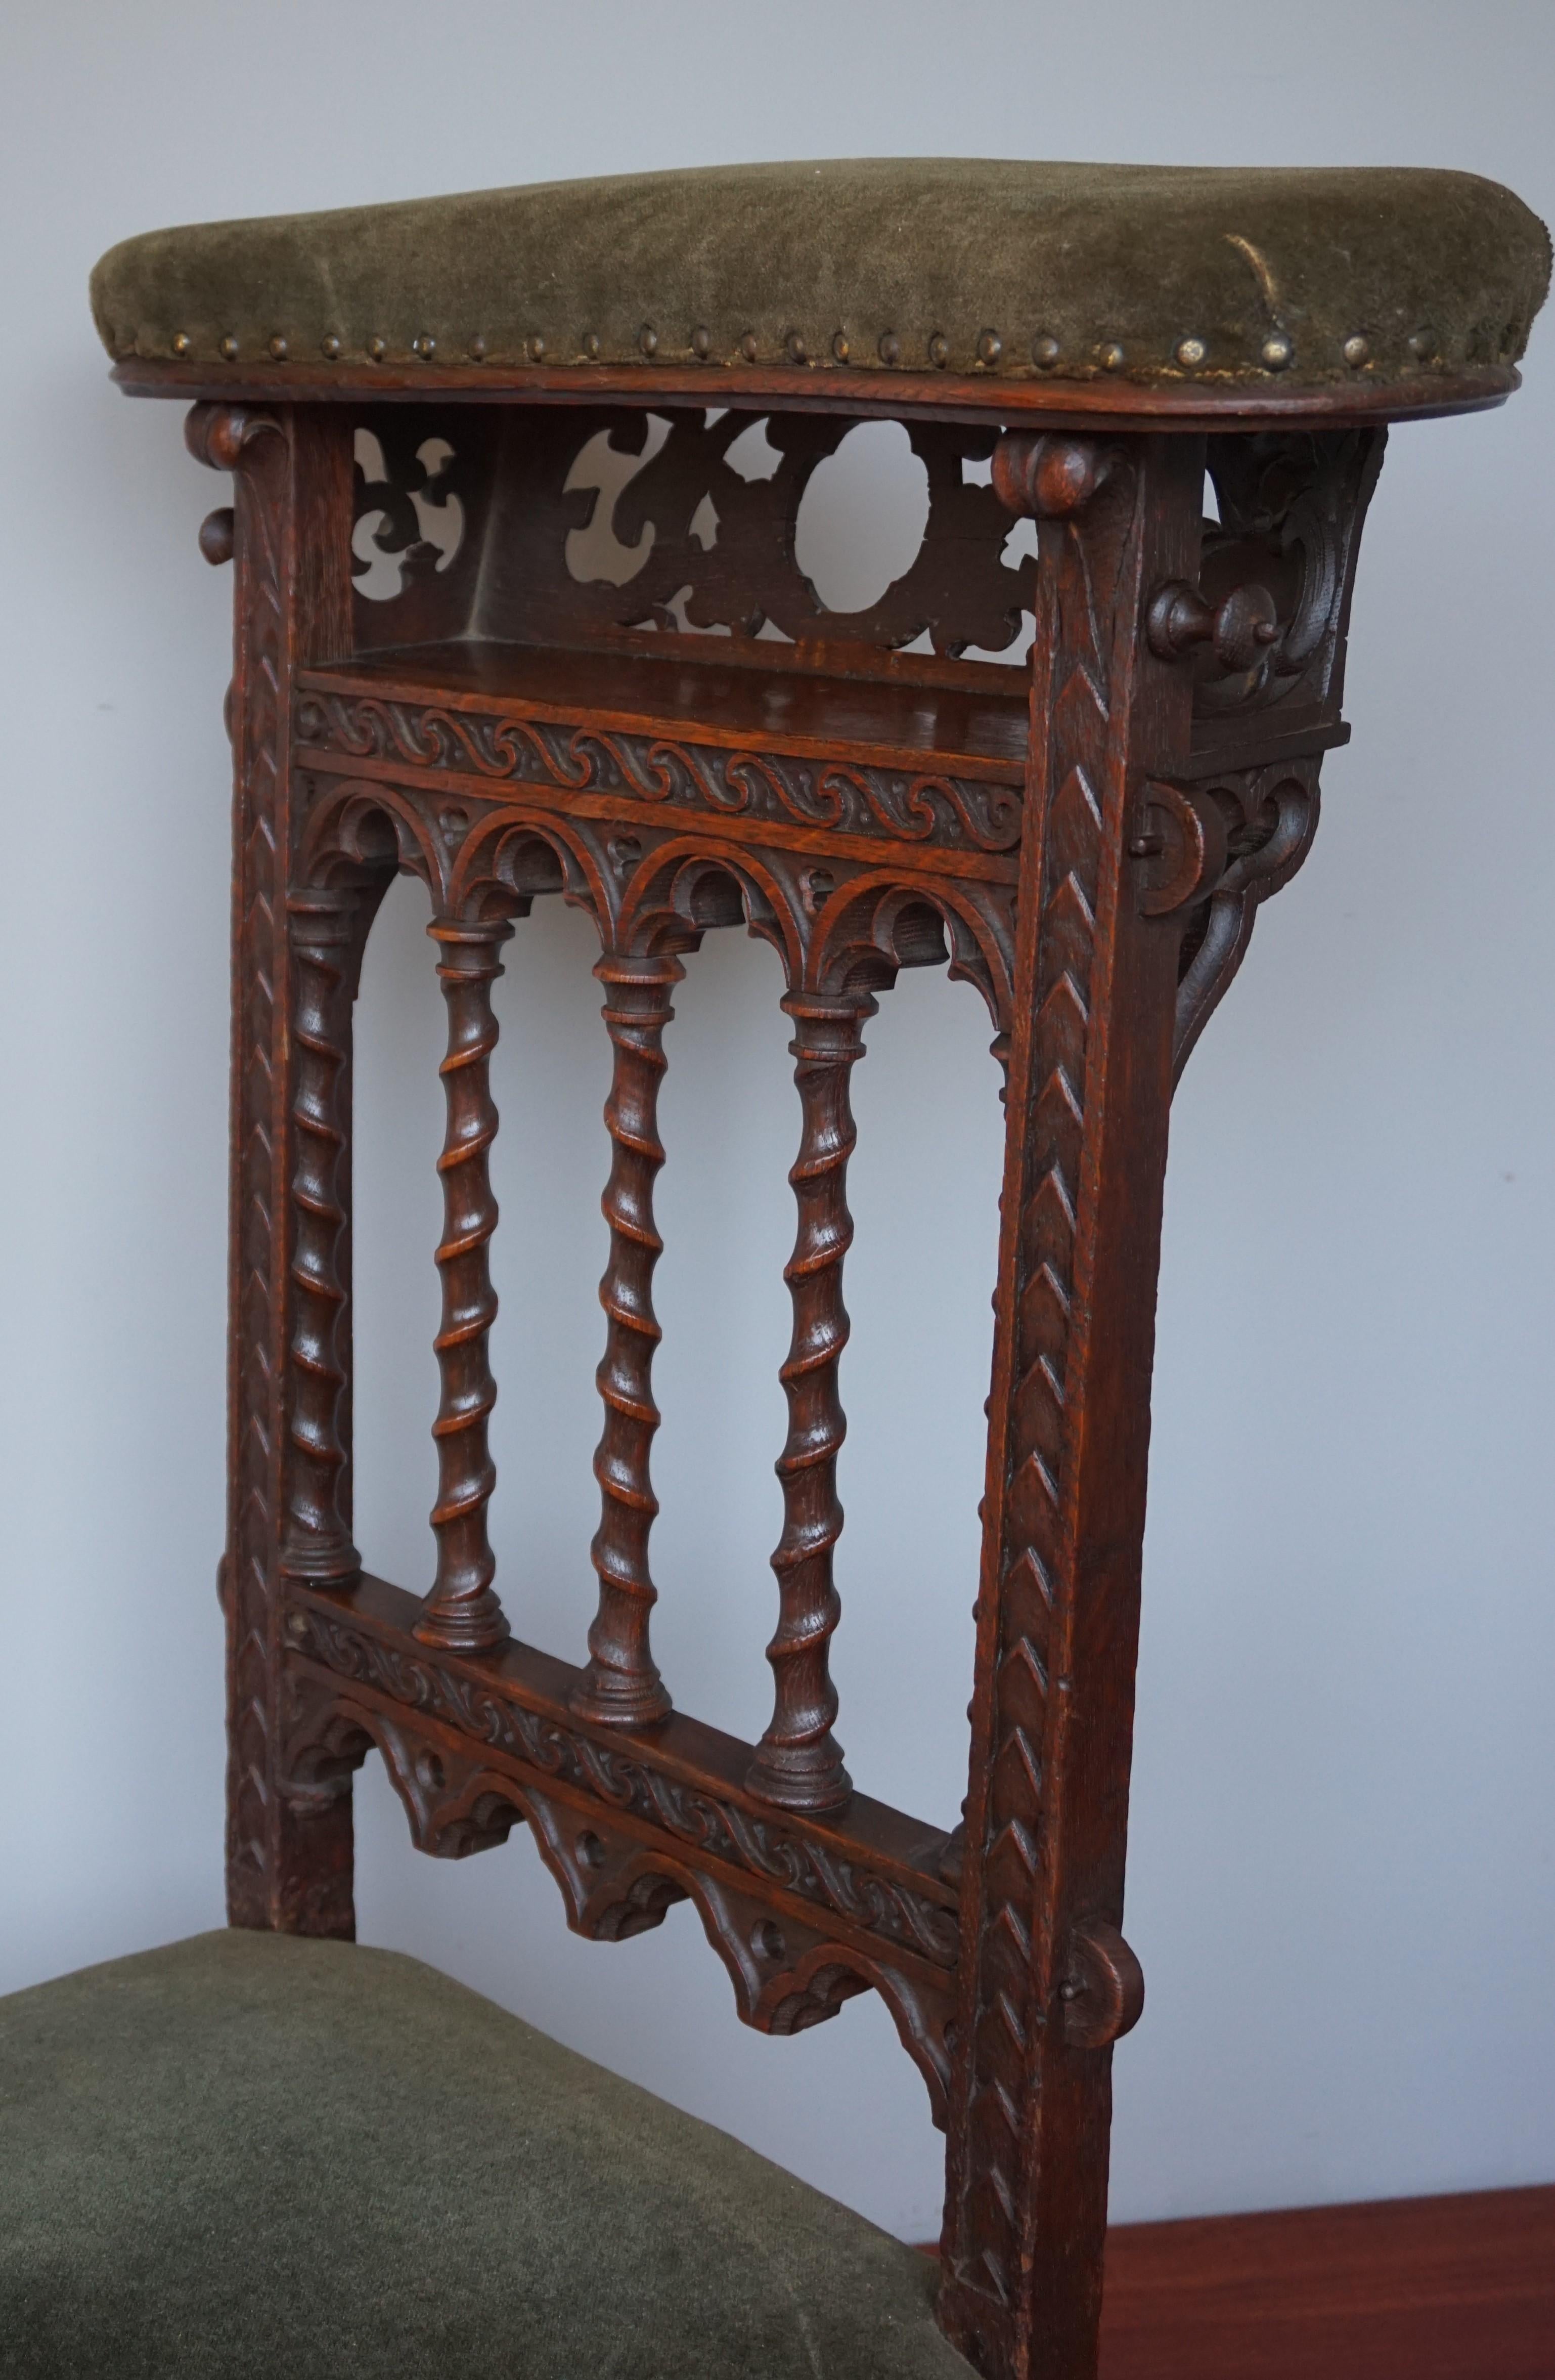 Unique church prayers chair of amazing workmanship.

Beautiful quality and very good condition praying chair from the mid-late 1800s. This one of a kind Gothic Revival chair for praying is the best we have ever had the pleasure of offering. Not only